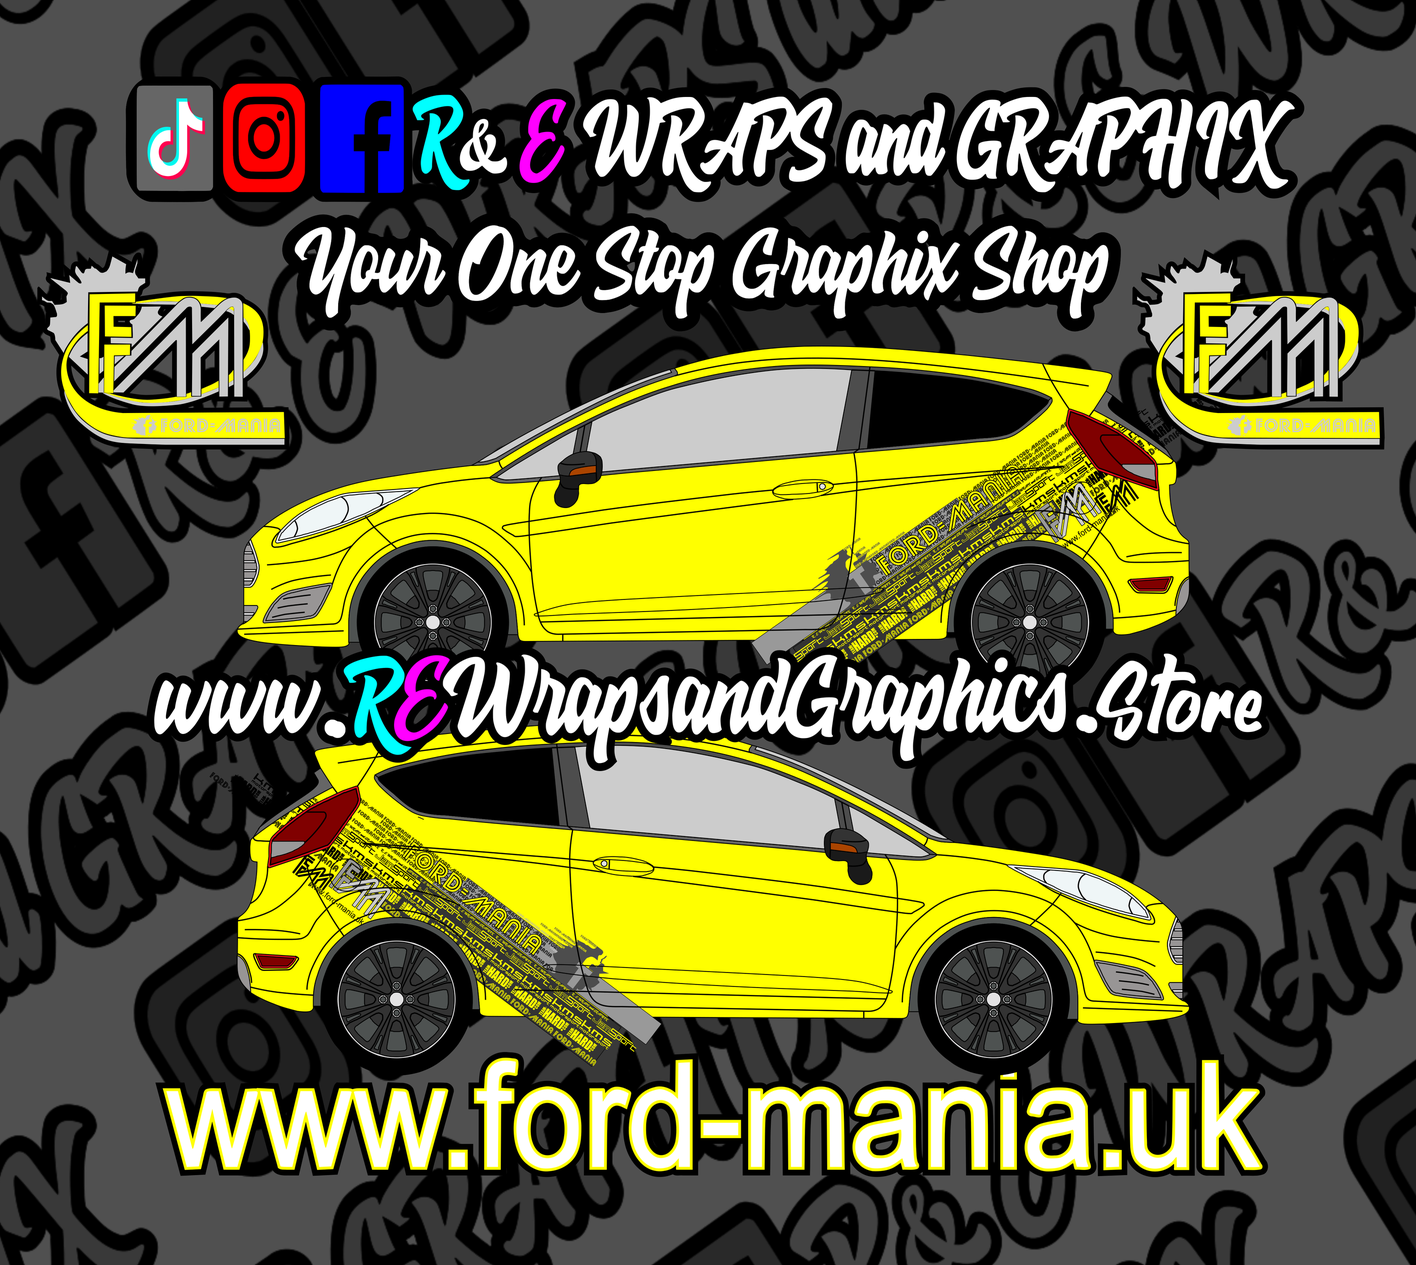 Ford Fiesta 2013-17 Ford Mania Graphic Kit (will fit ST models)